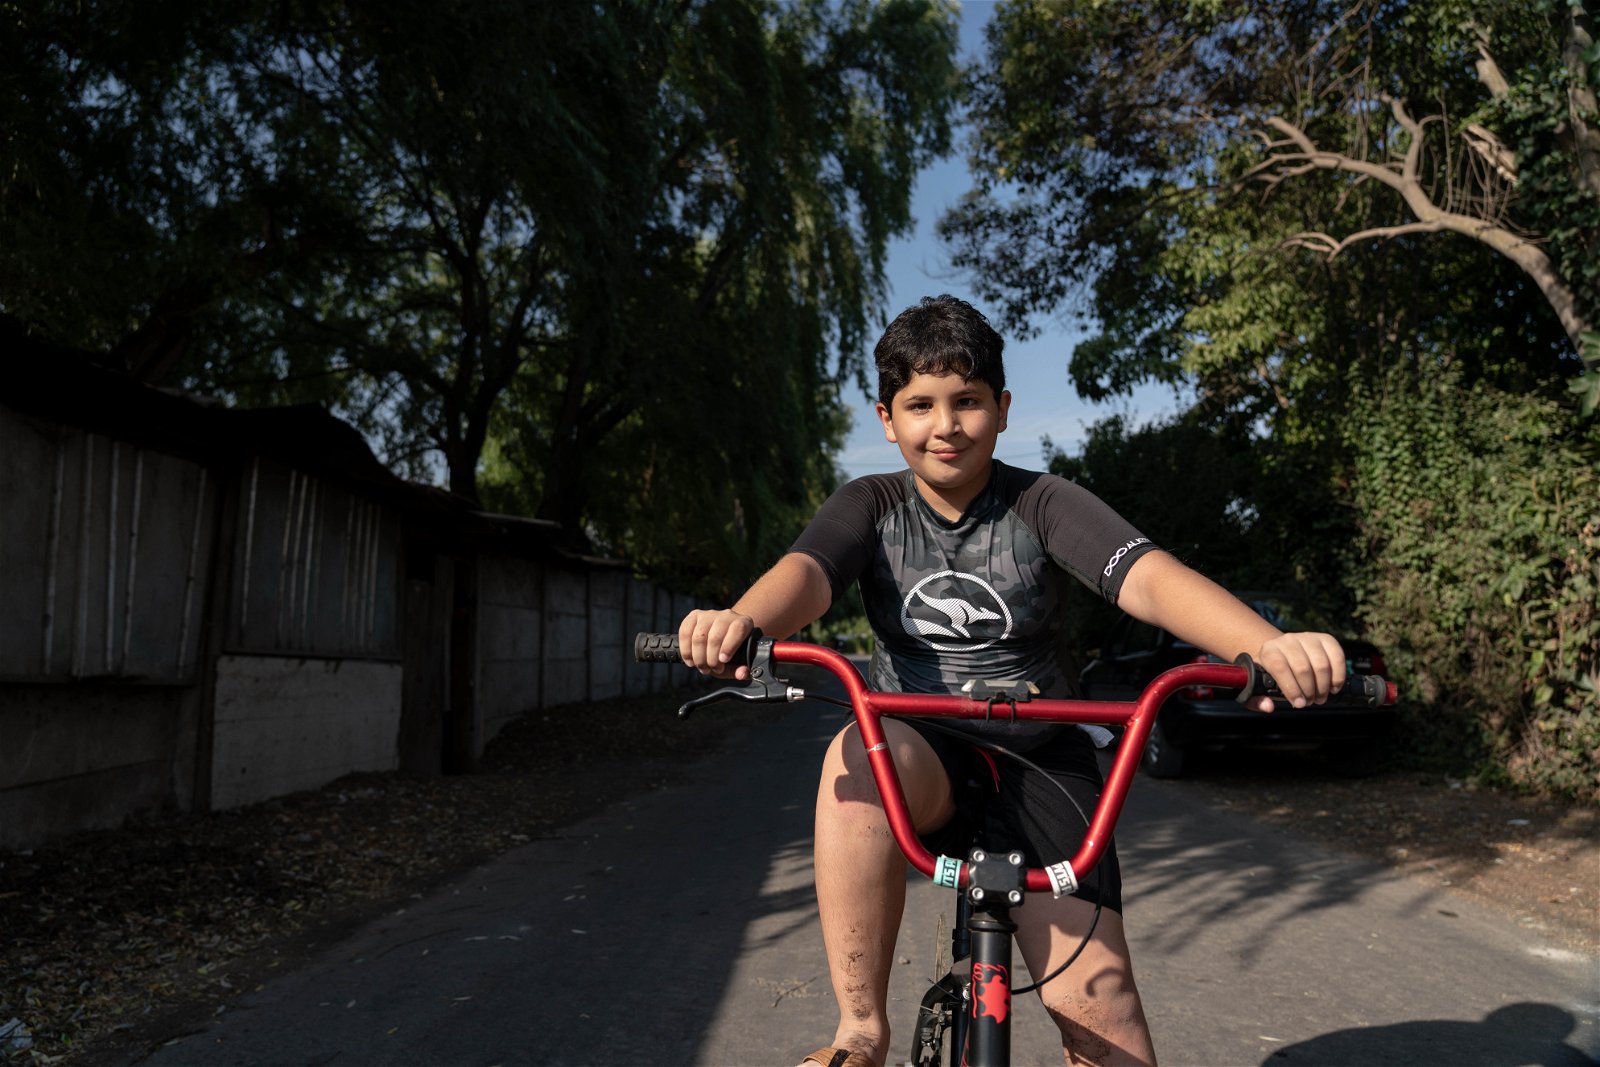 juan smiling as he rides his red bike down a road with trees on each side.